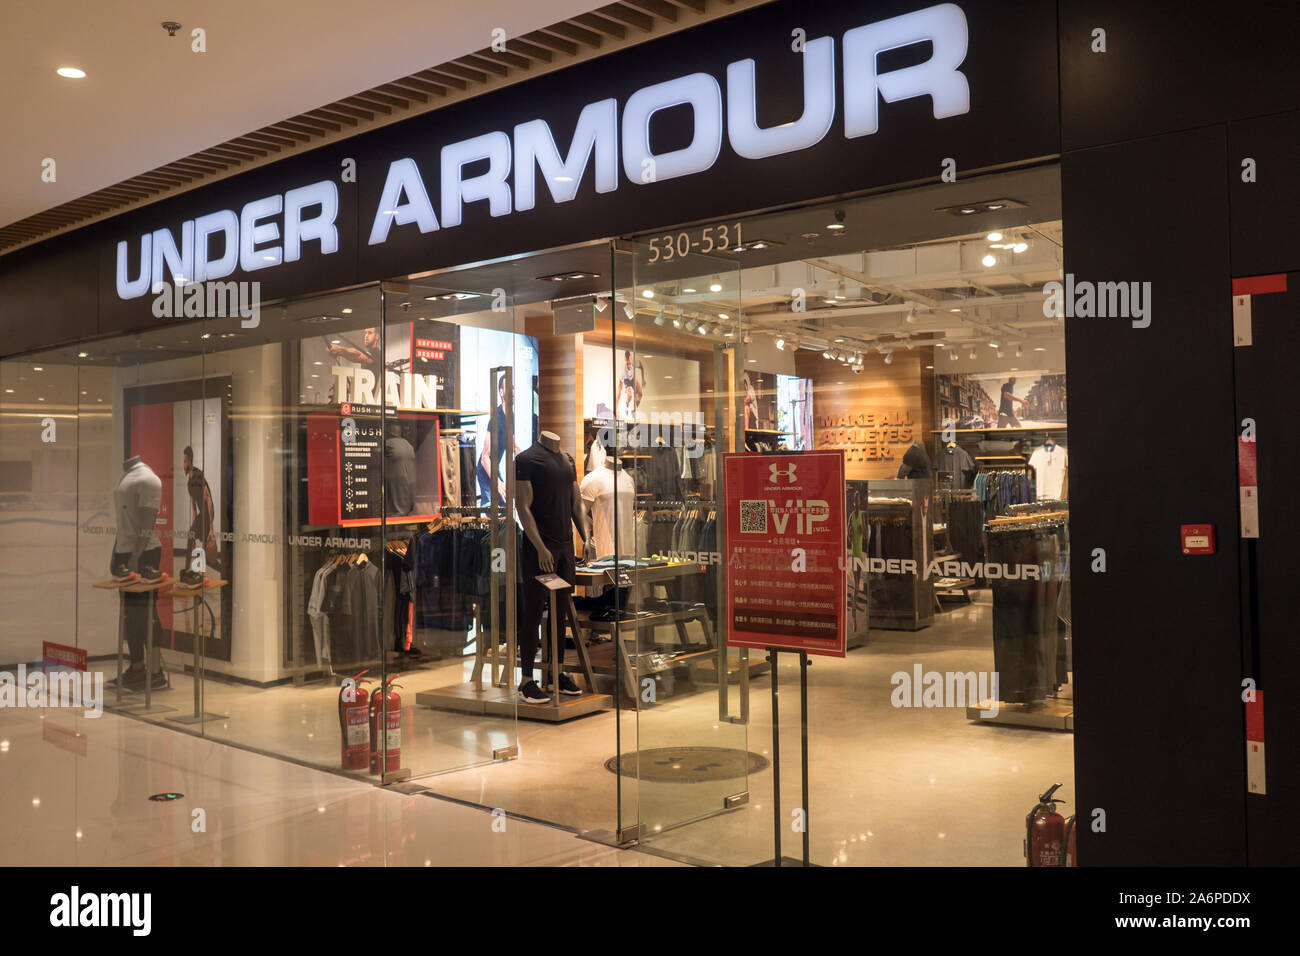 Under Armour Shoes High Resolution Stock Photography and Images - Alamy